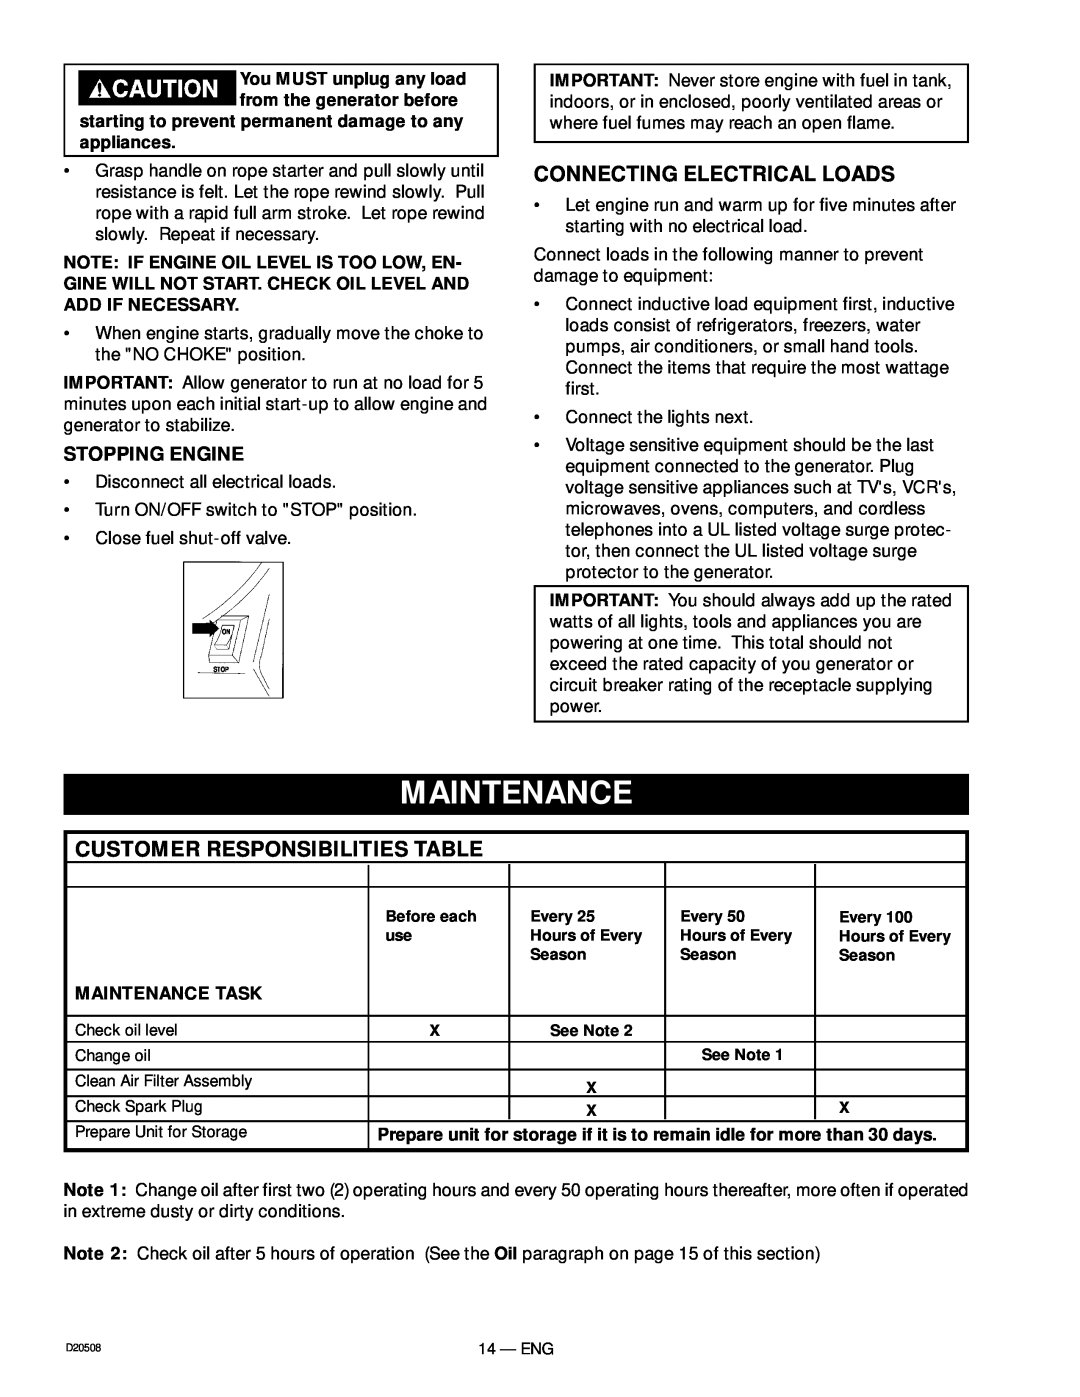 Sears D20508, 919.329110 Maintenance, Connecting Electrical Loads, Customer Responsibilities Table, Stopping Engine 